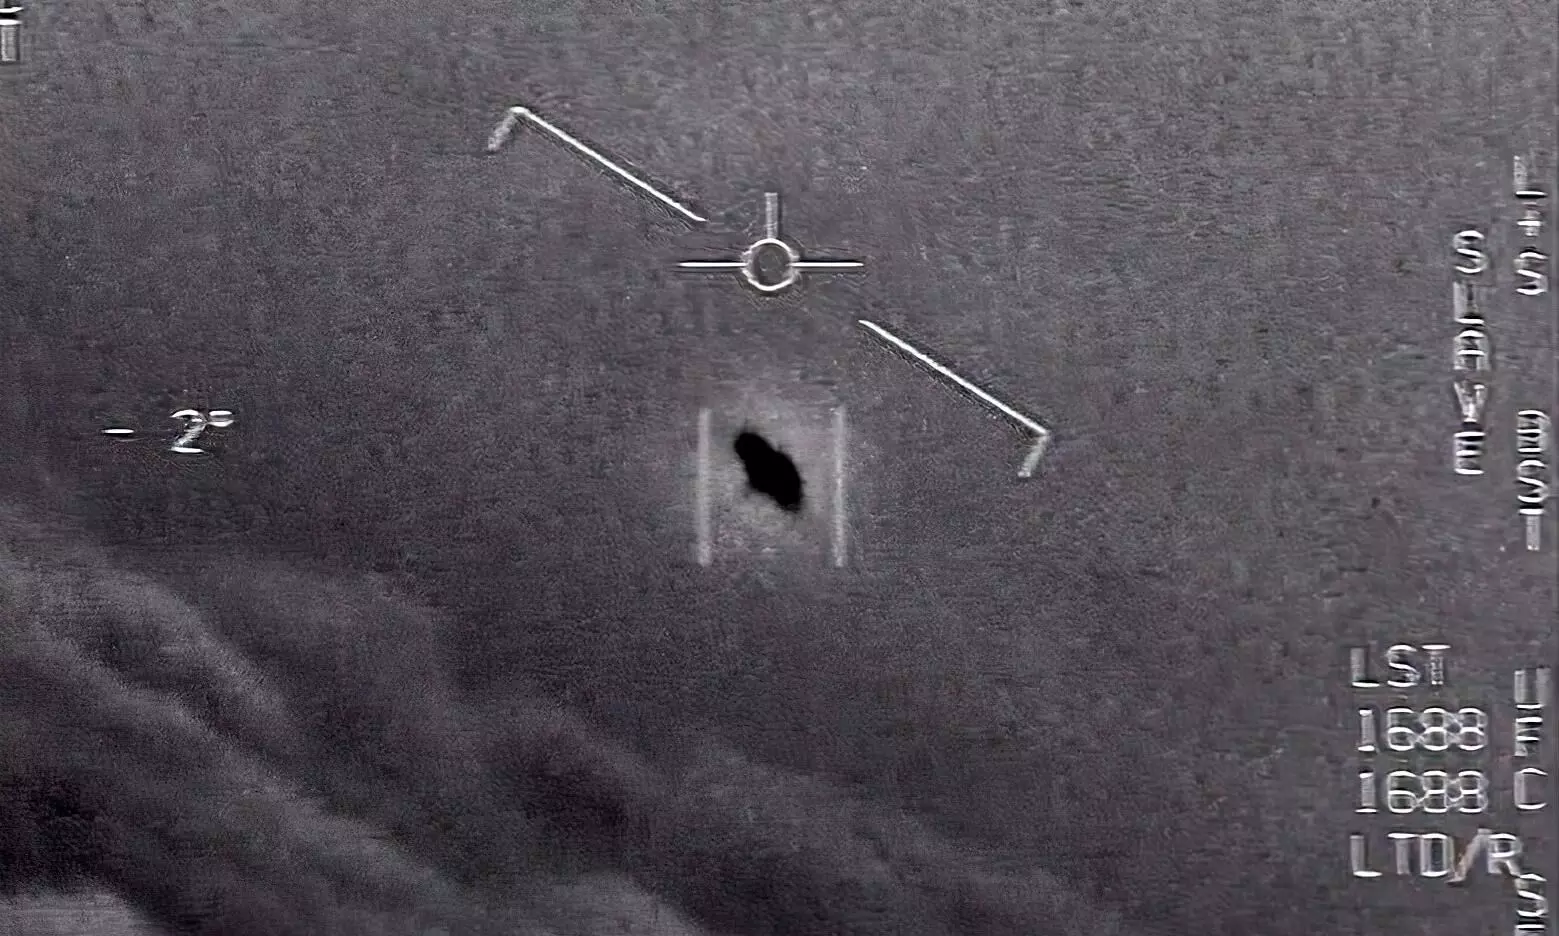 Ex-US intelligence claims ‘we are not alone but Govt hides info on extra-terrestrial objects